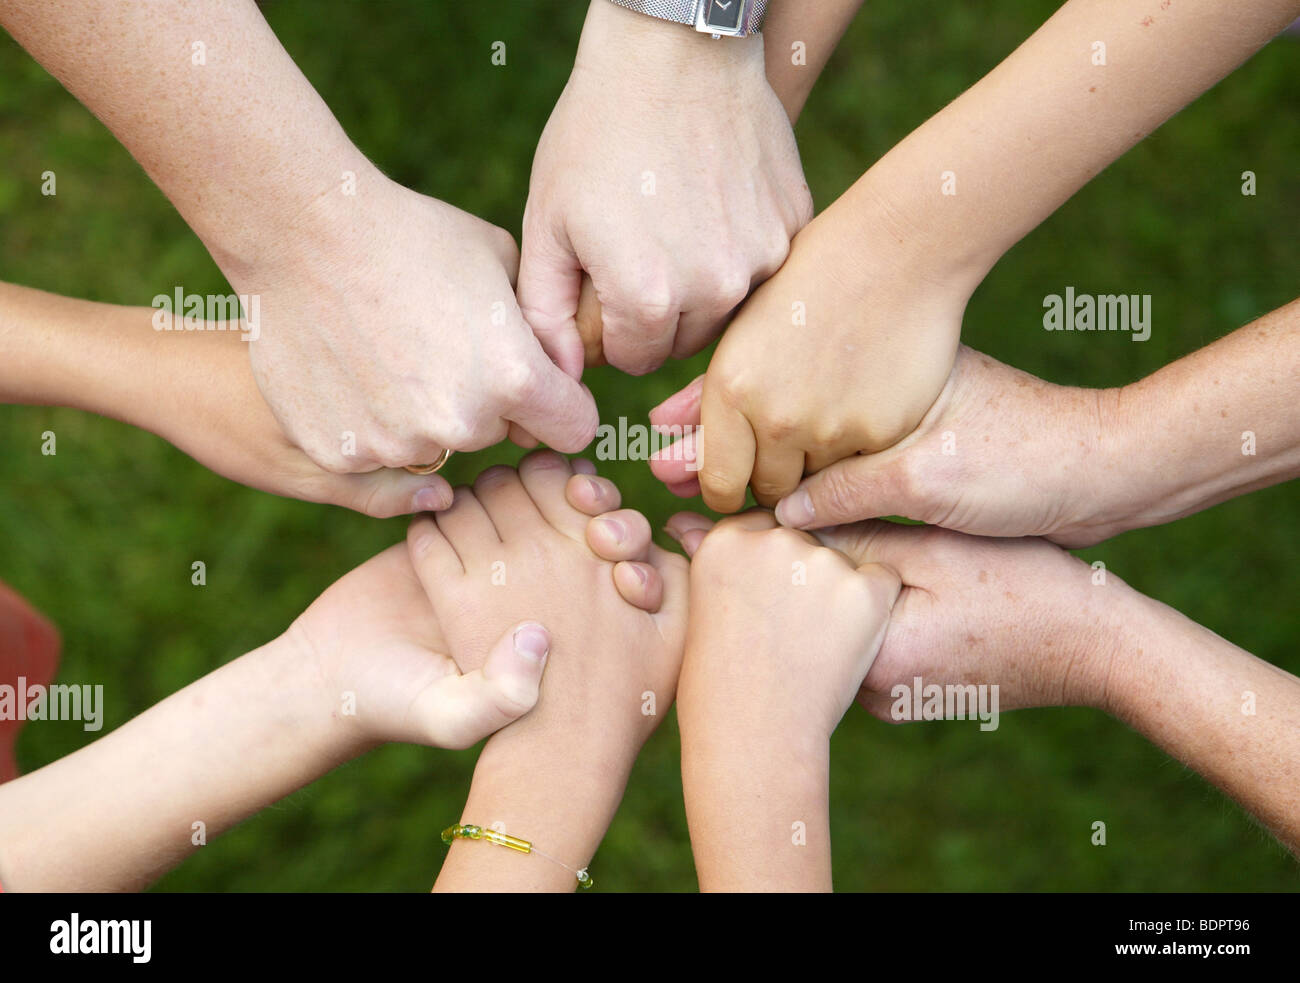 People holding hands Stock Photo